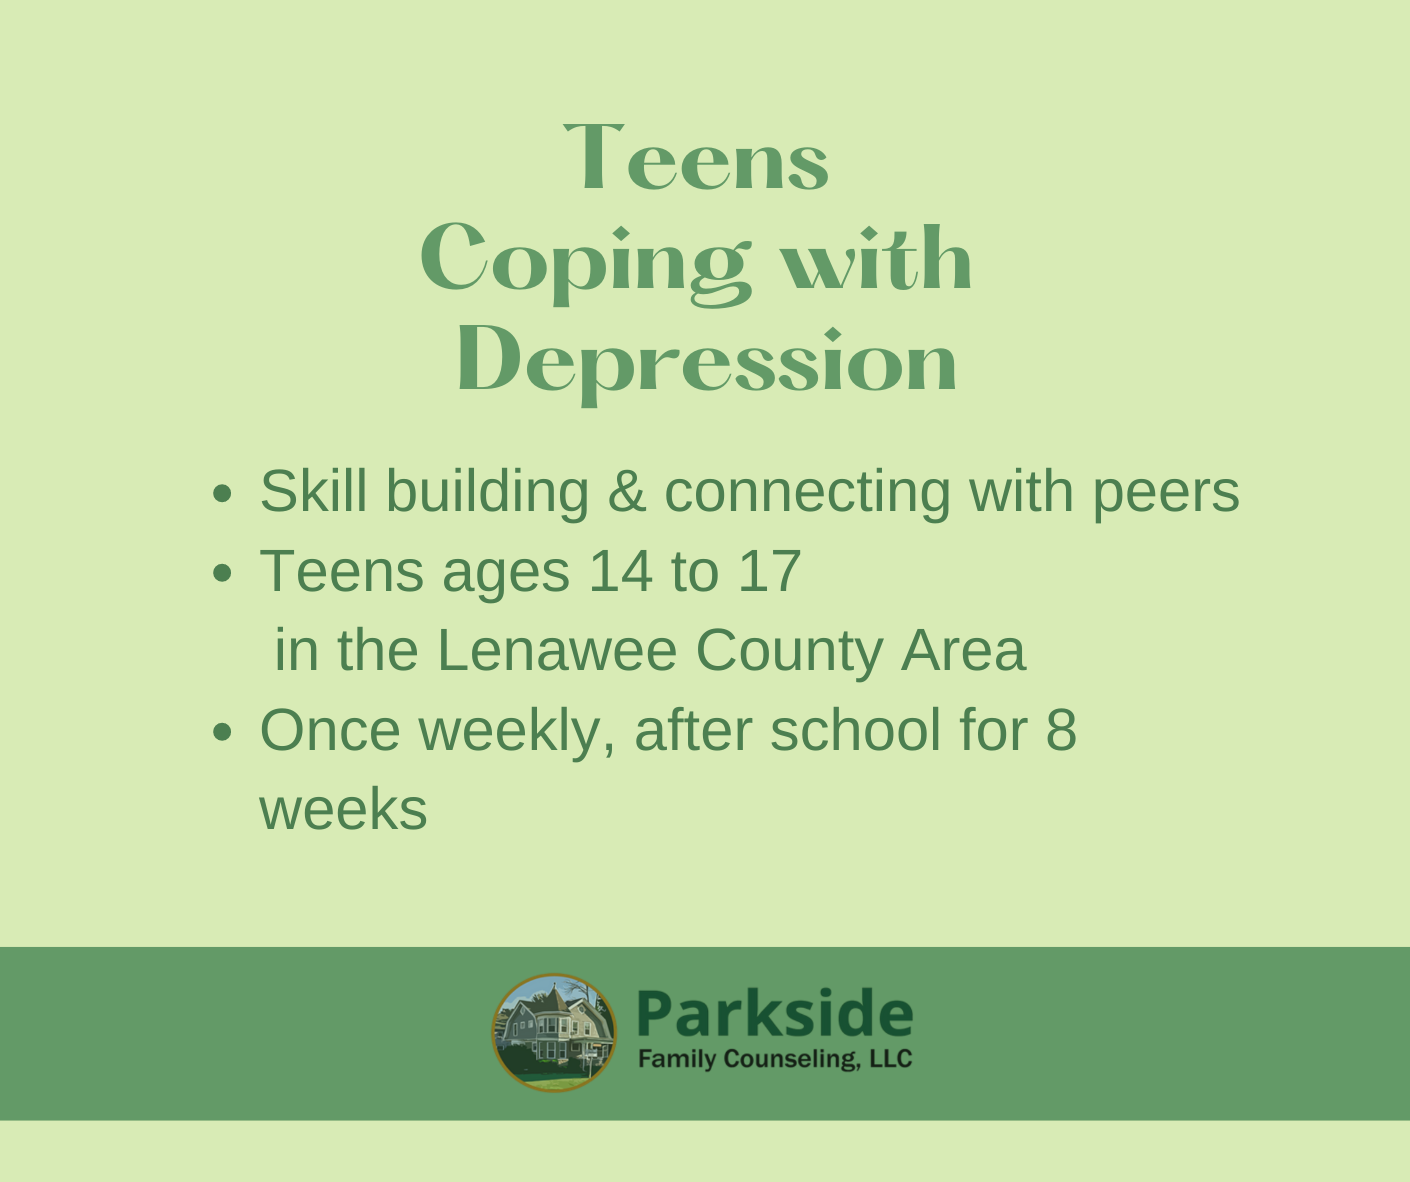 Teens coping with depression group 3